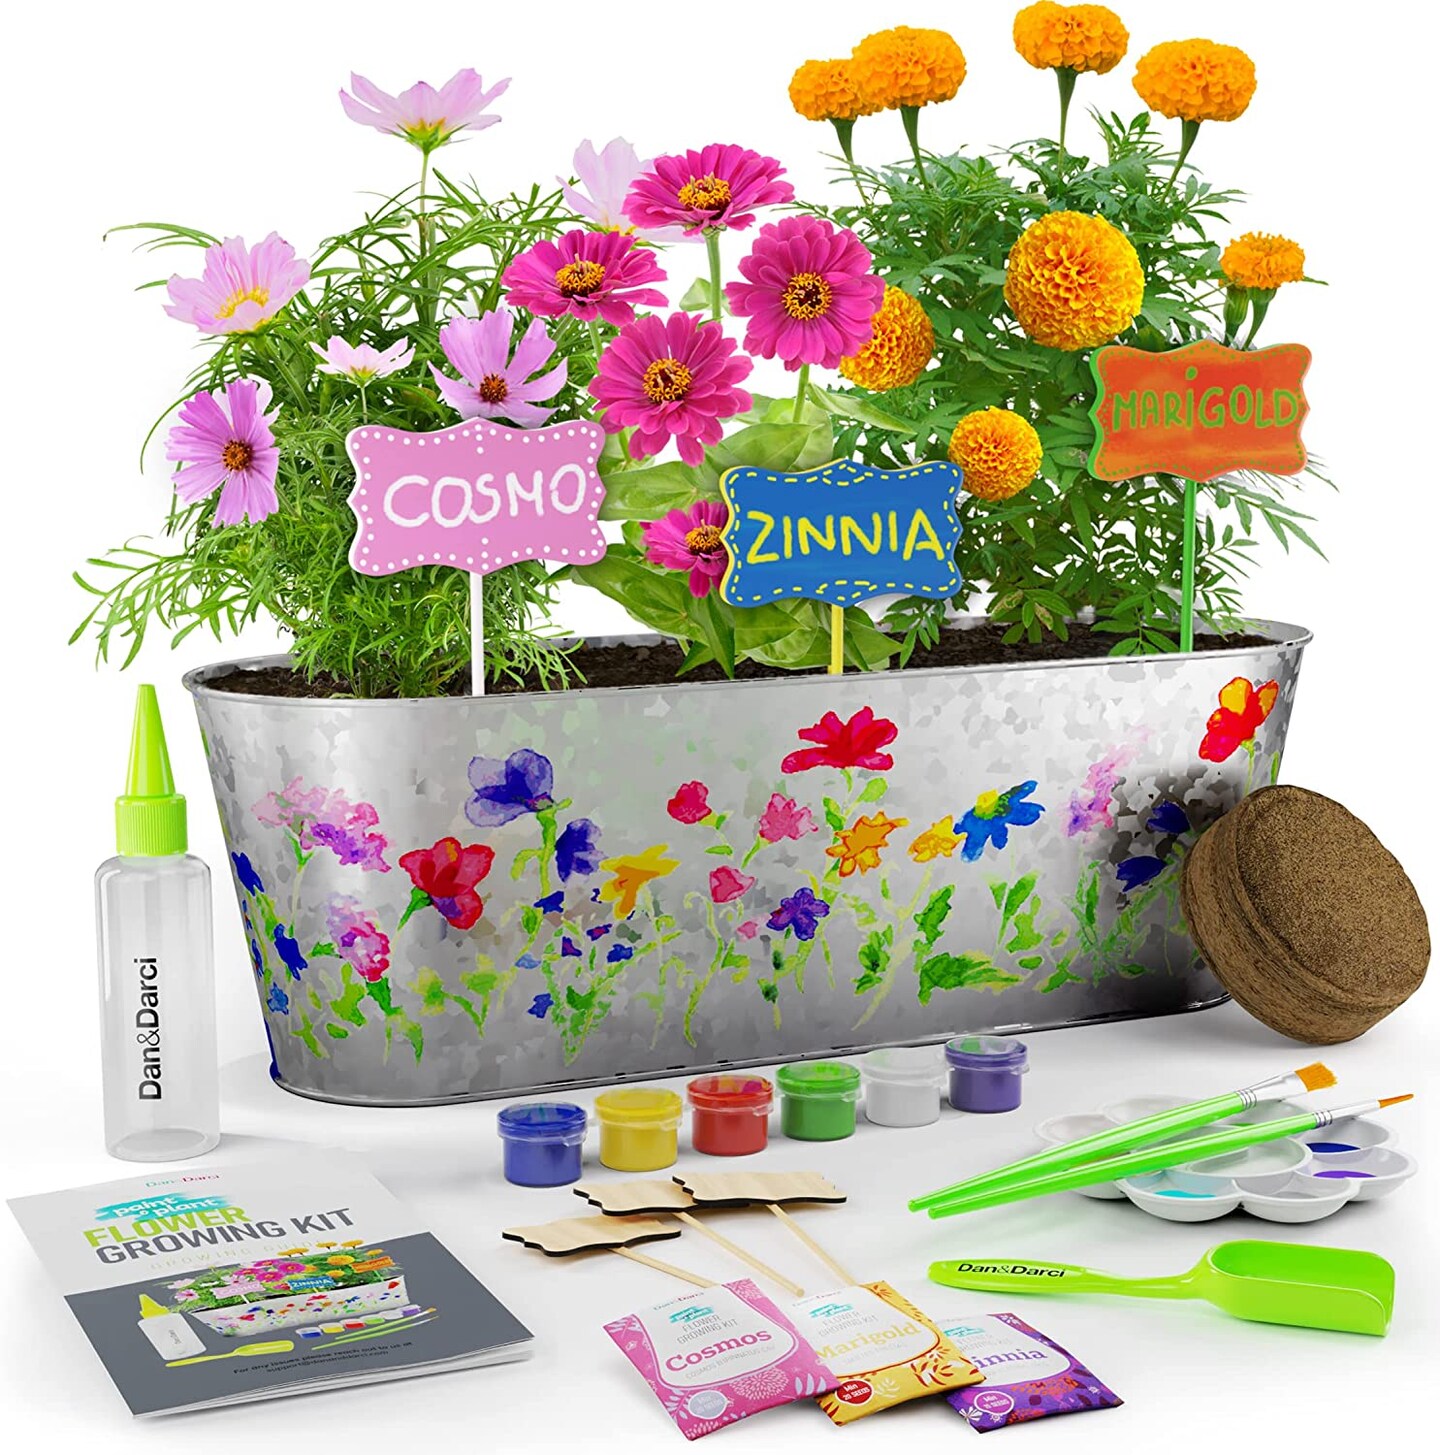 Paint &#x26; Plant Flower Craft Kit for Kids - Best Birthday Science Crafts Gifts for Girls &#x26; Boys Age 5 6 7 8-12 Year Old Girl Gift - Children Gardening Kits, Art Projects Toys for Ages 5-12 years